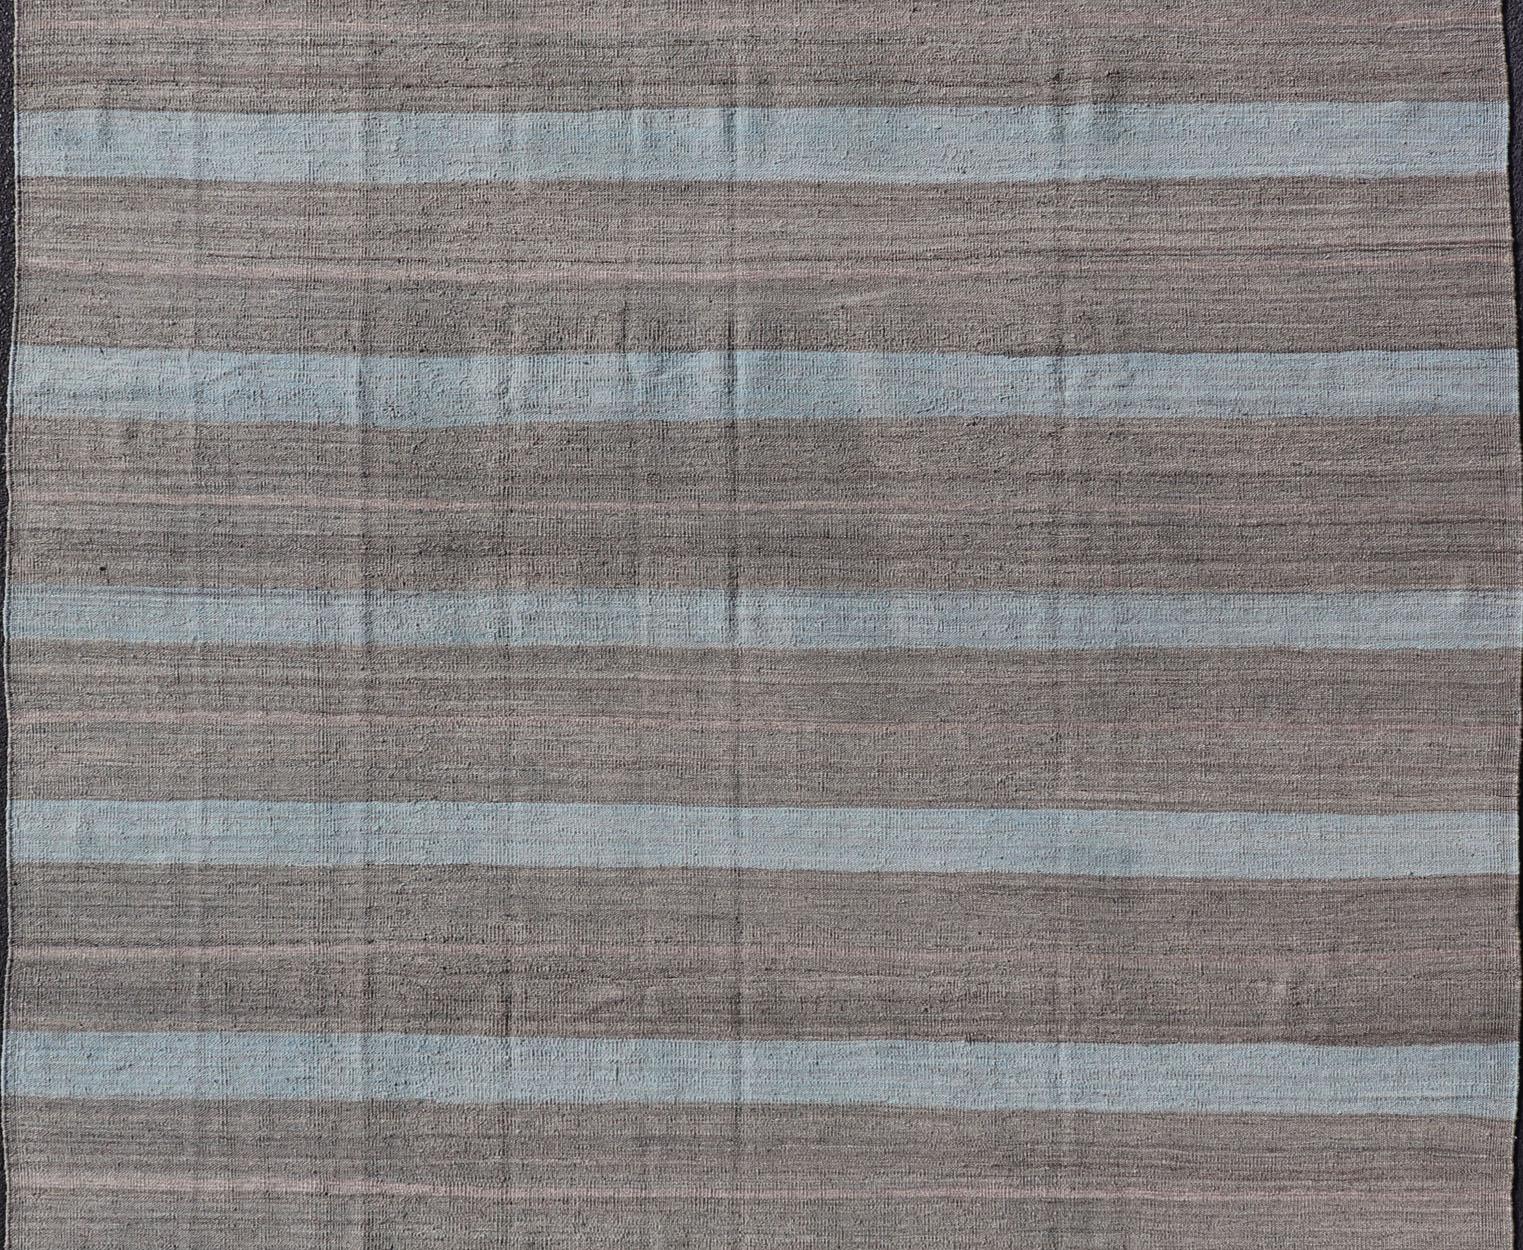 Hand-Woven Modern Kilim Casual Rug with Stripes in Shades of Blue, Gray' and Charcoal